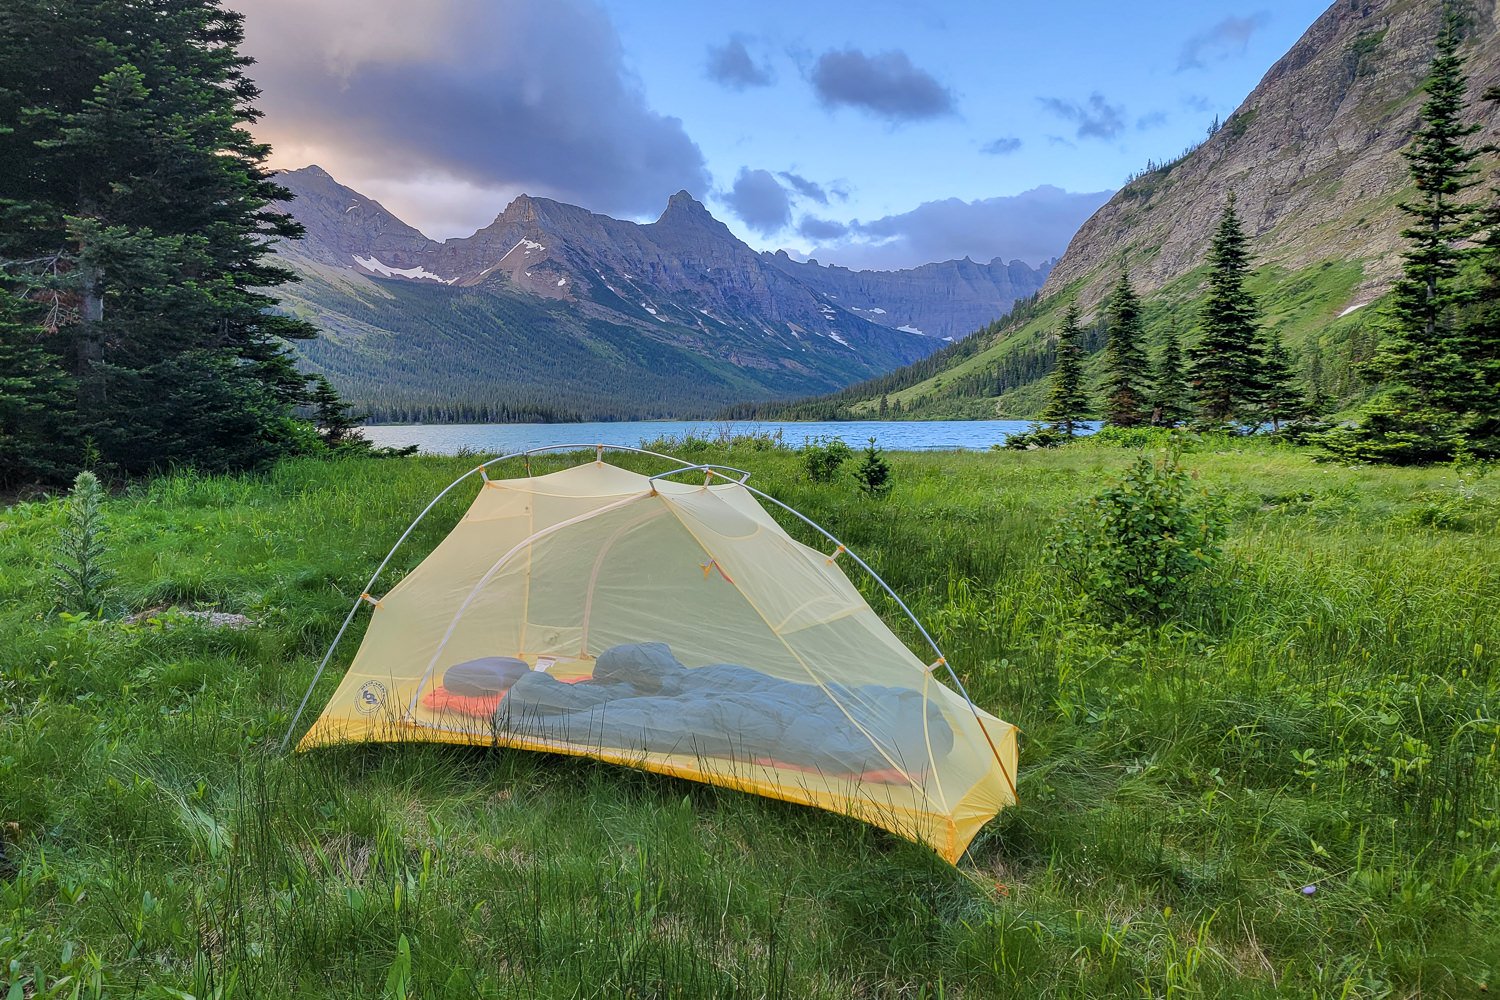 The Big Agnes Tiger Wall set up in a lush campsite with a lake mountain and moody sky in the background